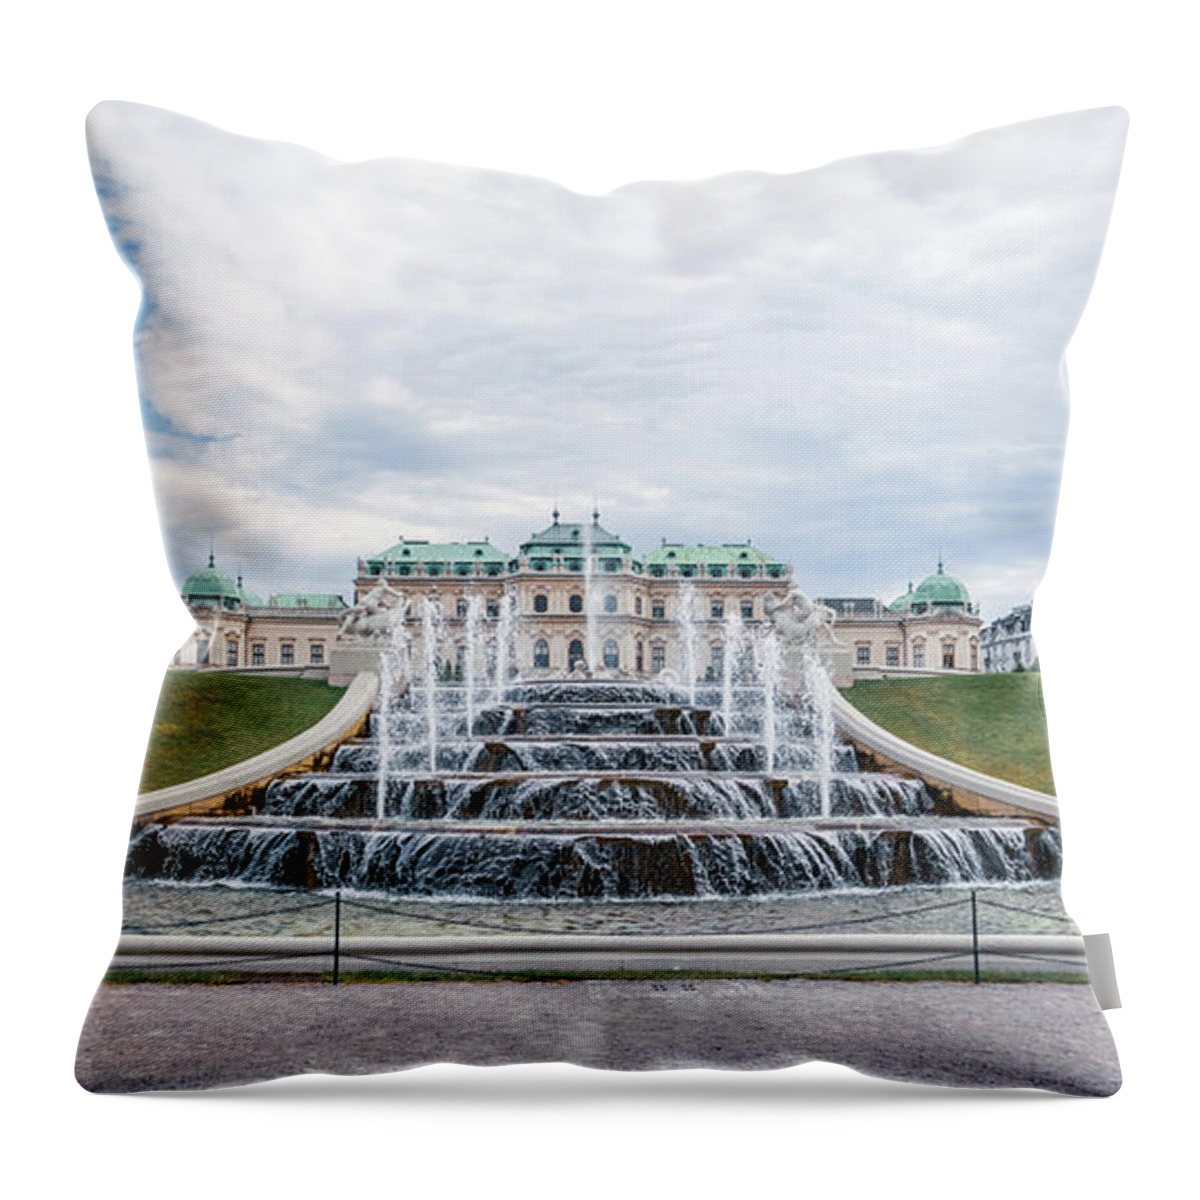  Throw Pillow featuring the photograph Vienna Gardens #12 by Angela Carrion Photography